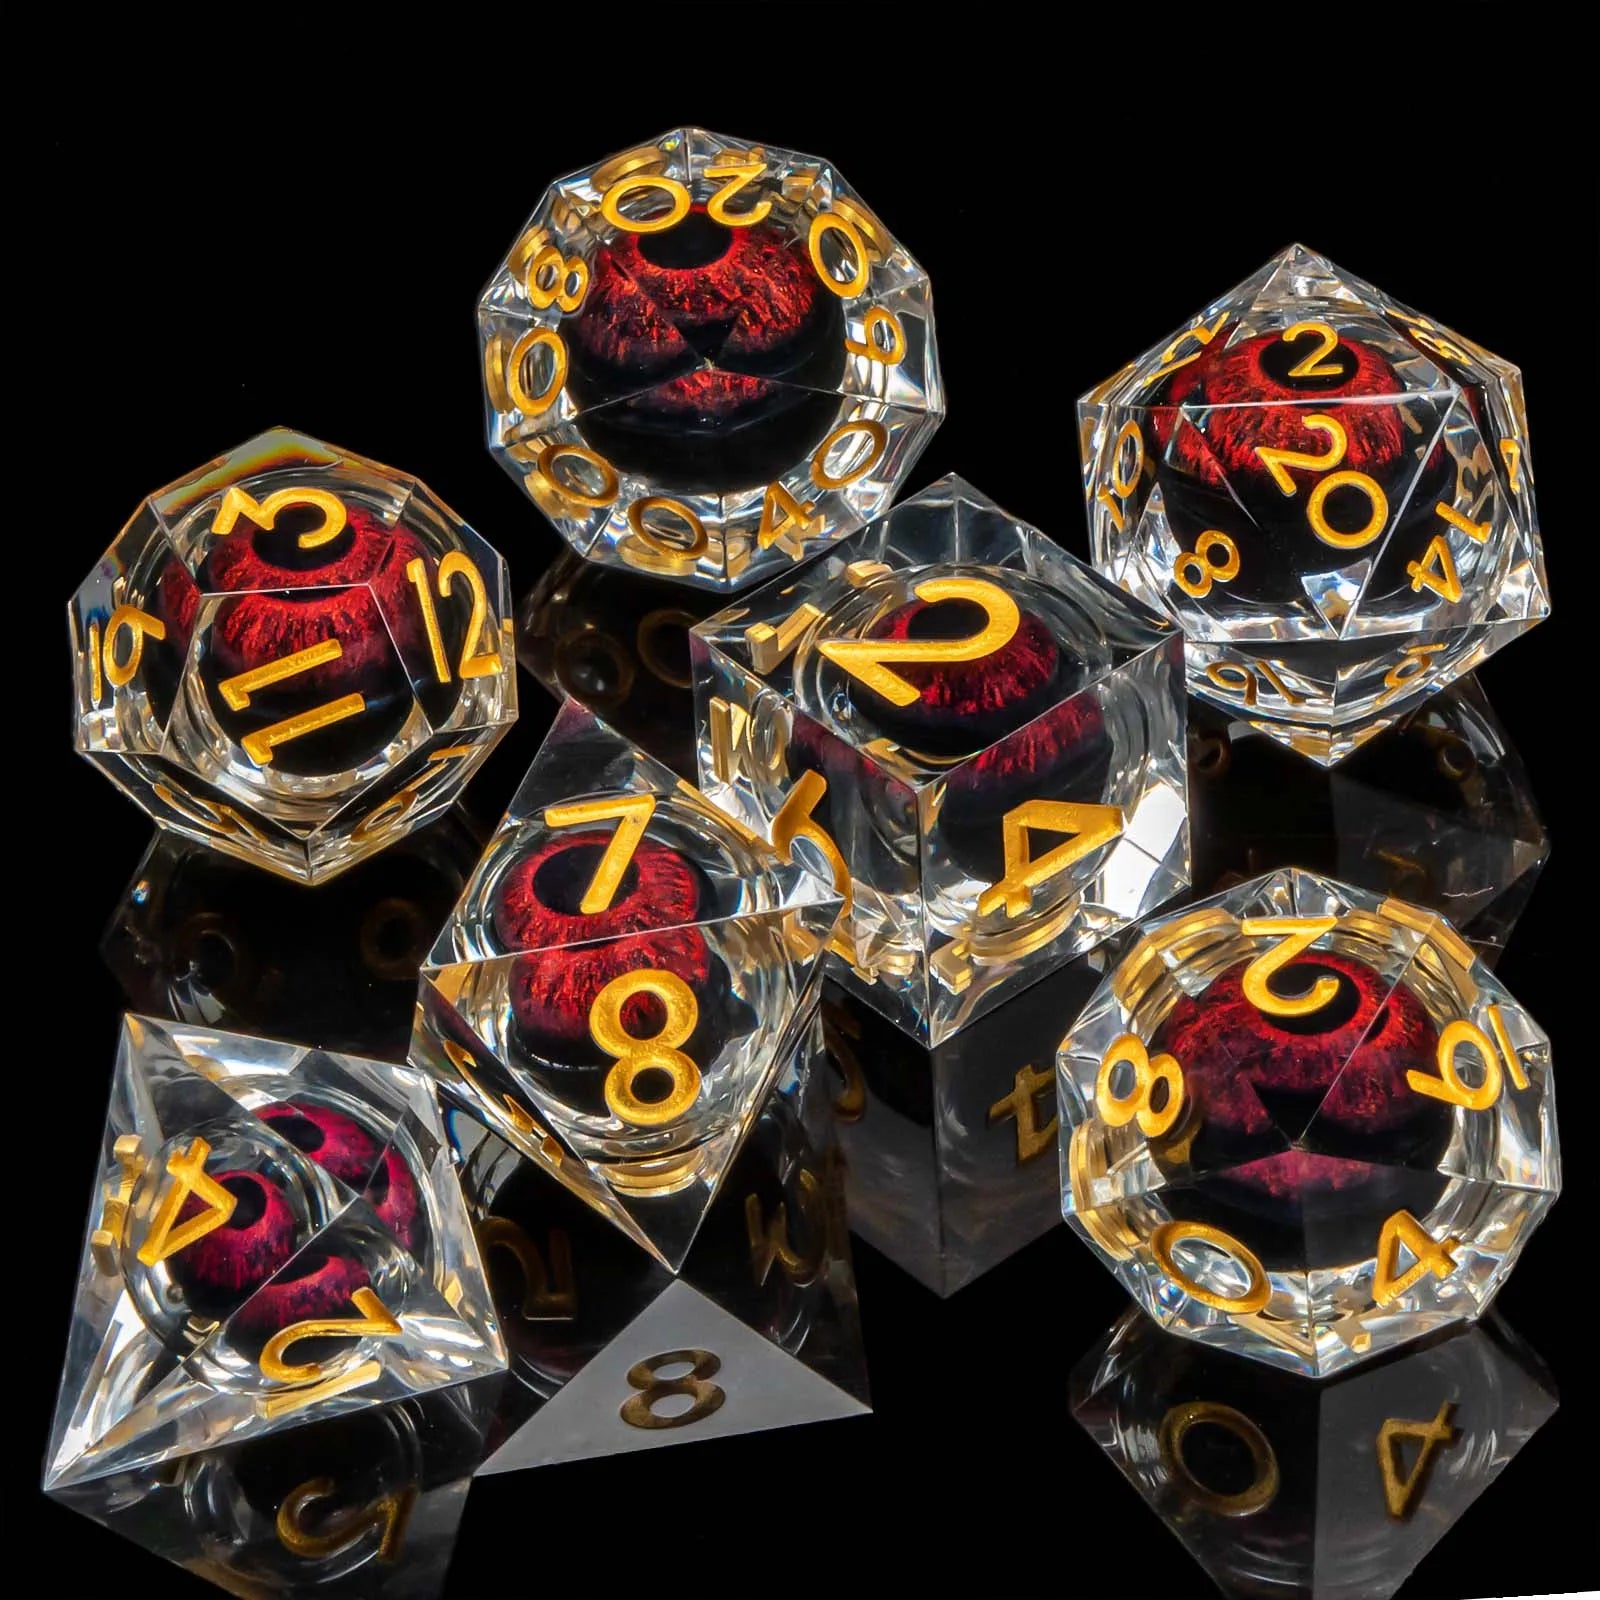 DND Eye Liquid Flow Core Resin D&D Dice Set For D and D Dungeon and Dragon Pathfinder Table Role Playing Game Polyhedral Dice AZ16